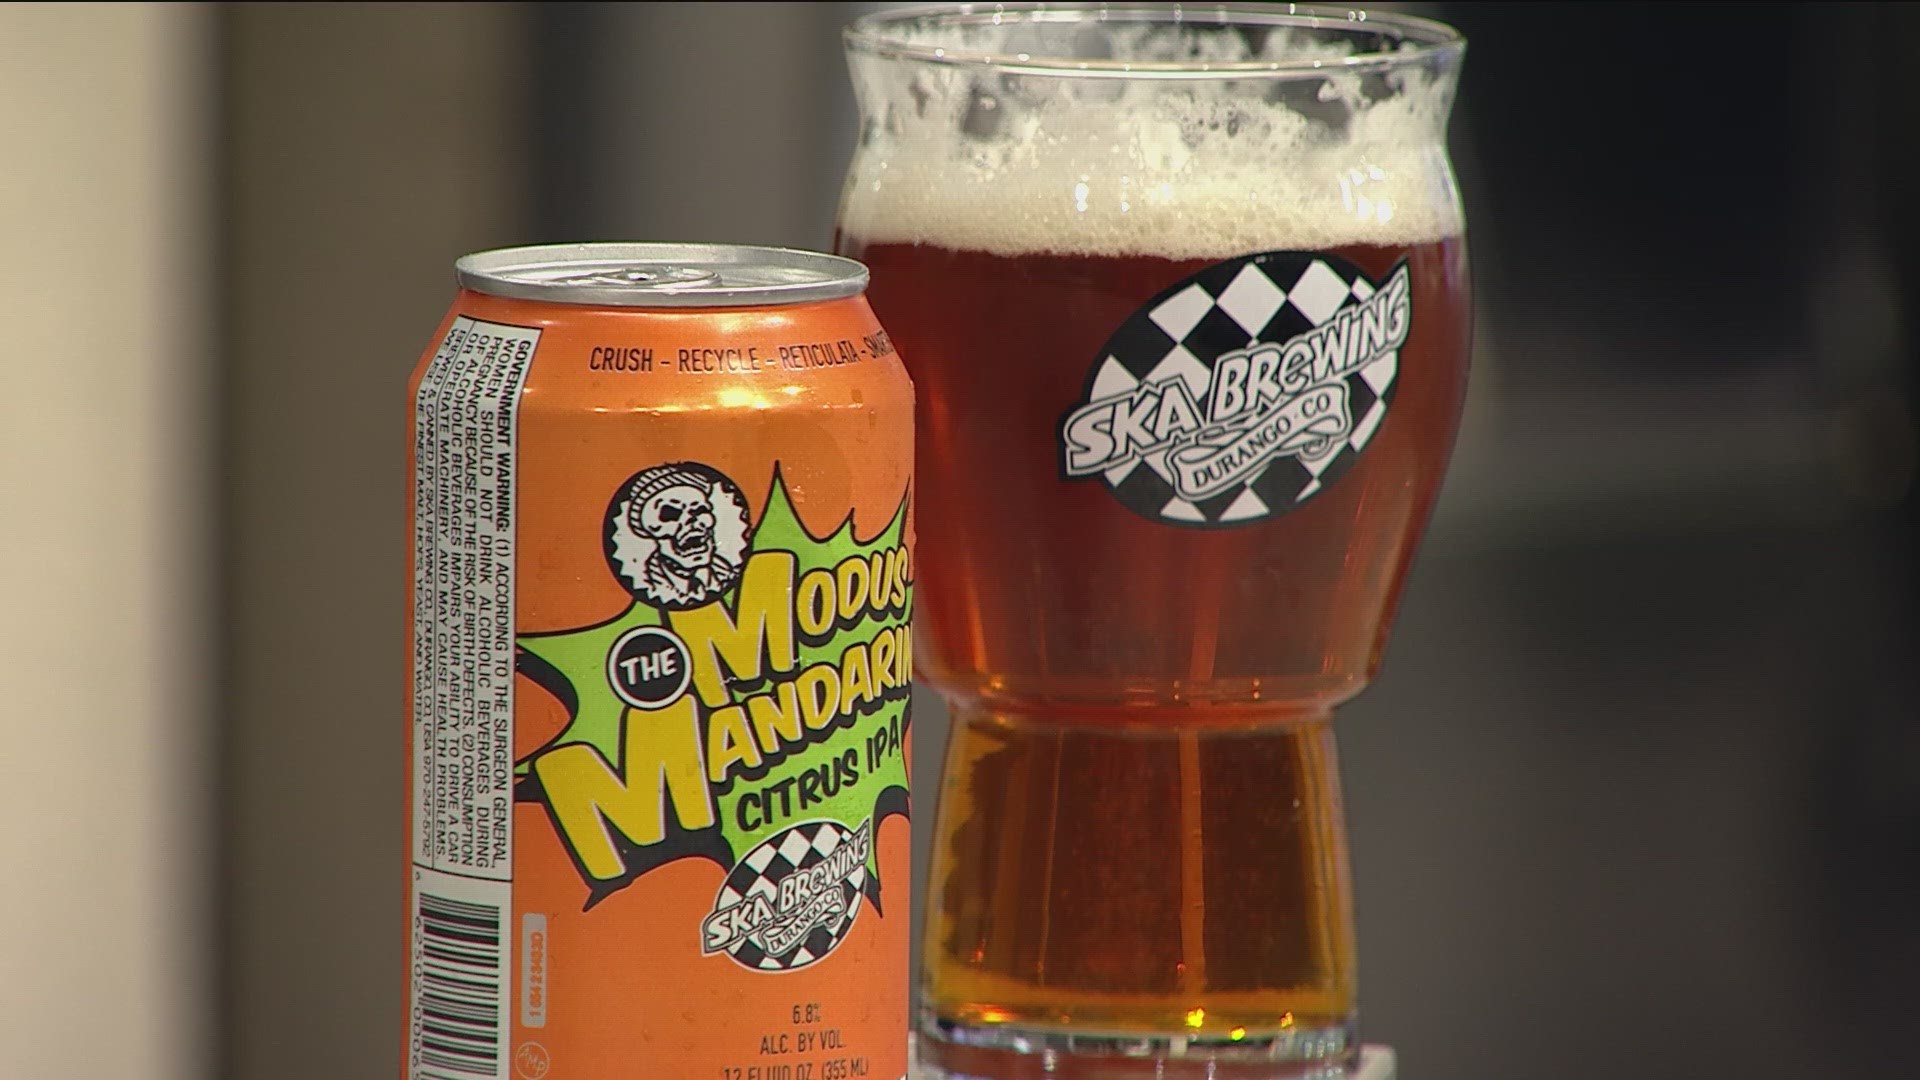 Check out the Modus Mandarina and other great brews at SkaBrewing.com.